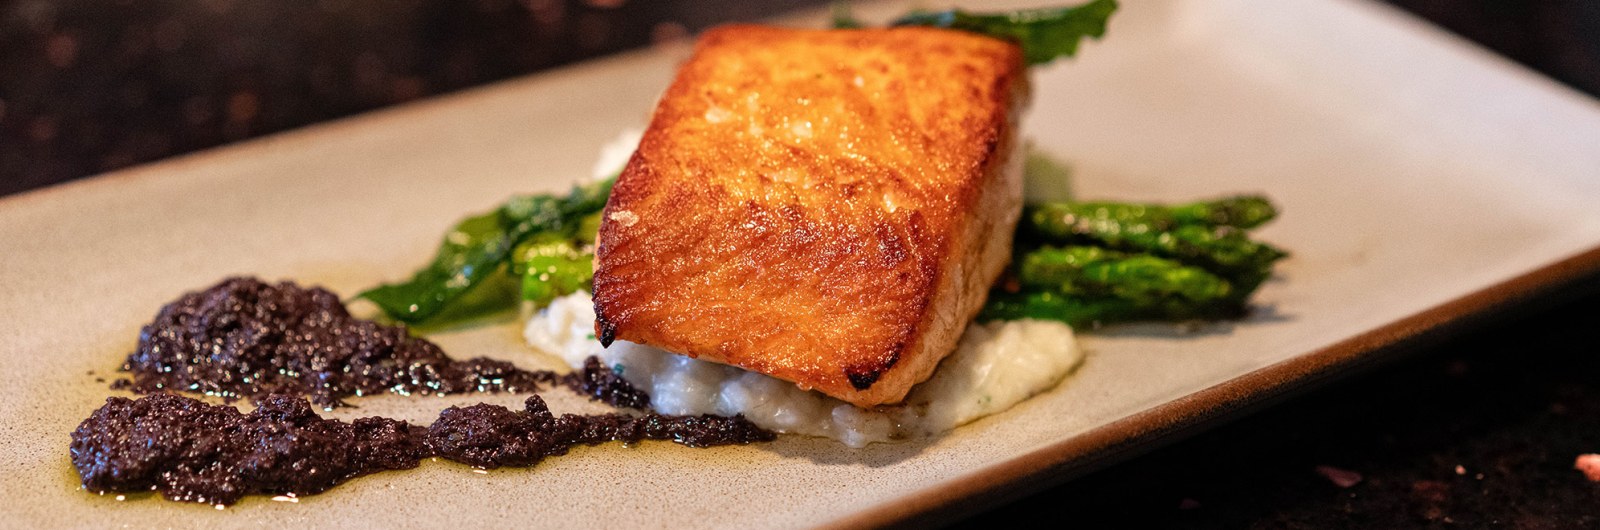 Photograph of a salmon dish served at Edna's at the Tamarack Club